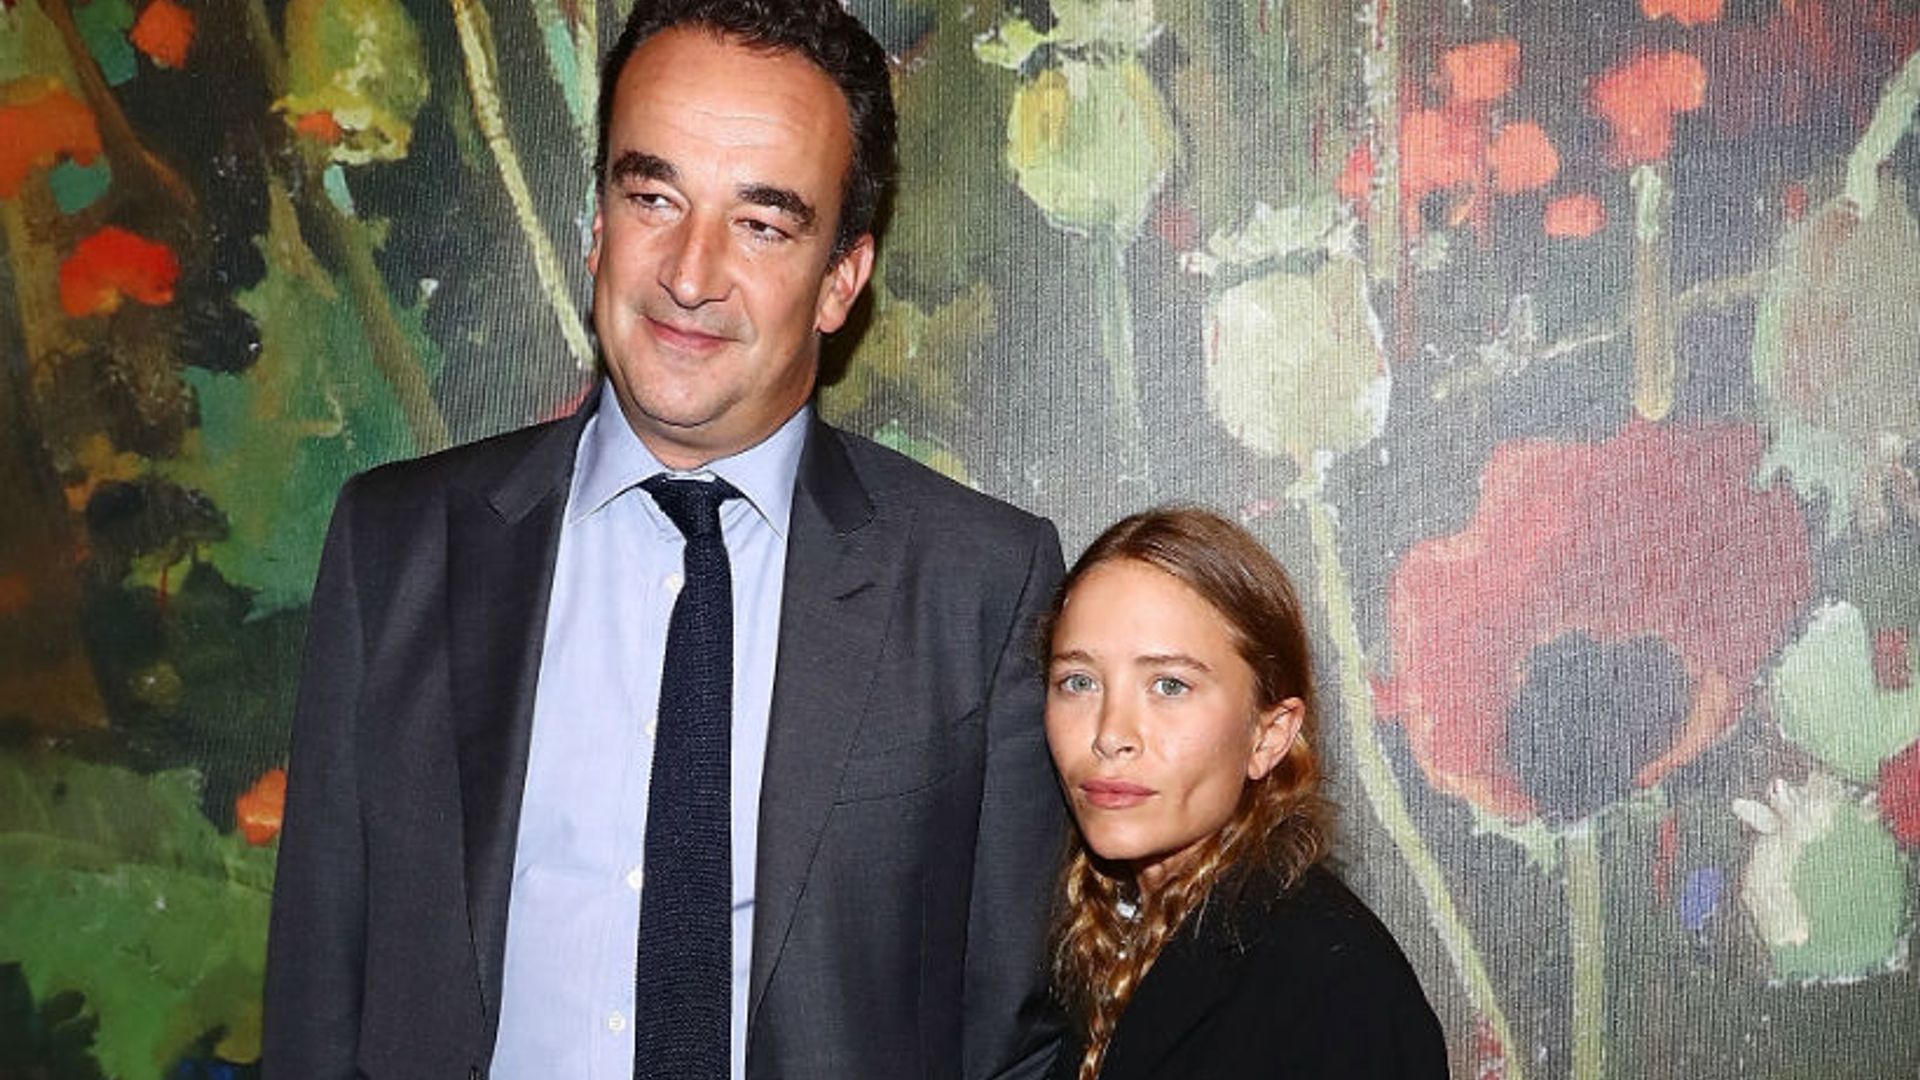 Mary-Kate Olsen steps out in style with husband Olivier Sarkozy